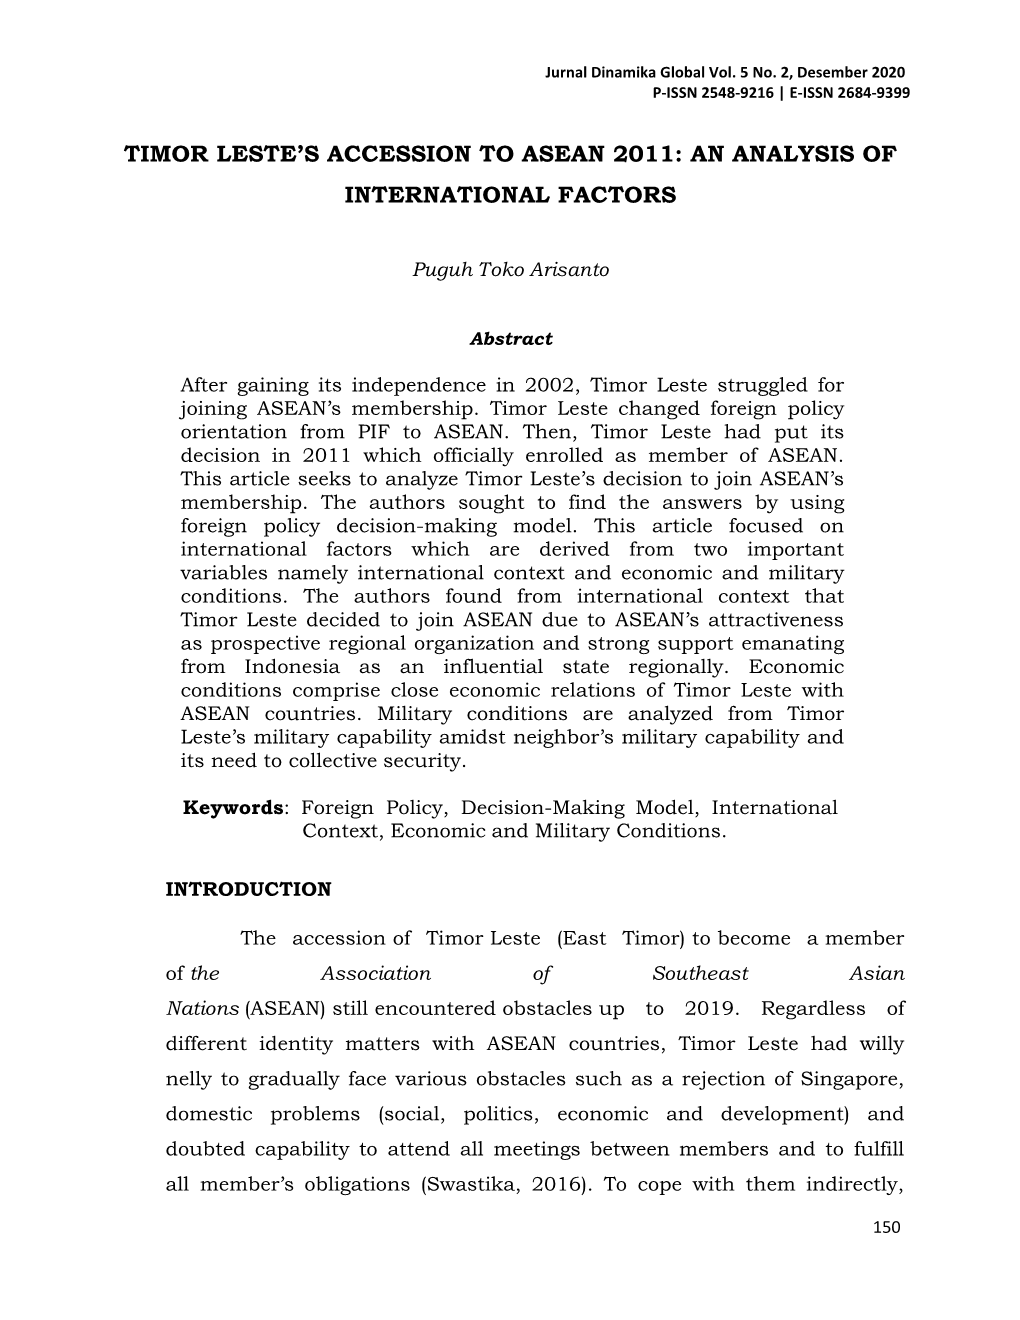 Timor Leste's Accession to Asean 2011: an Analysis of International Factors